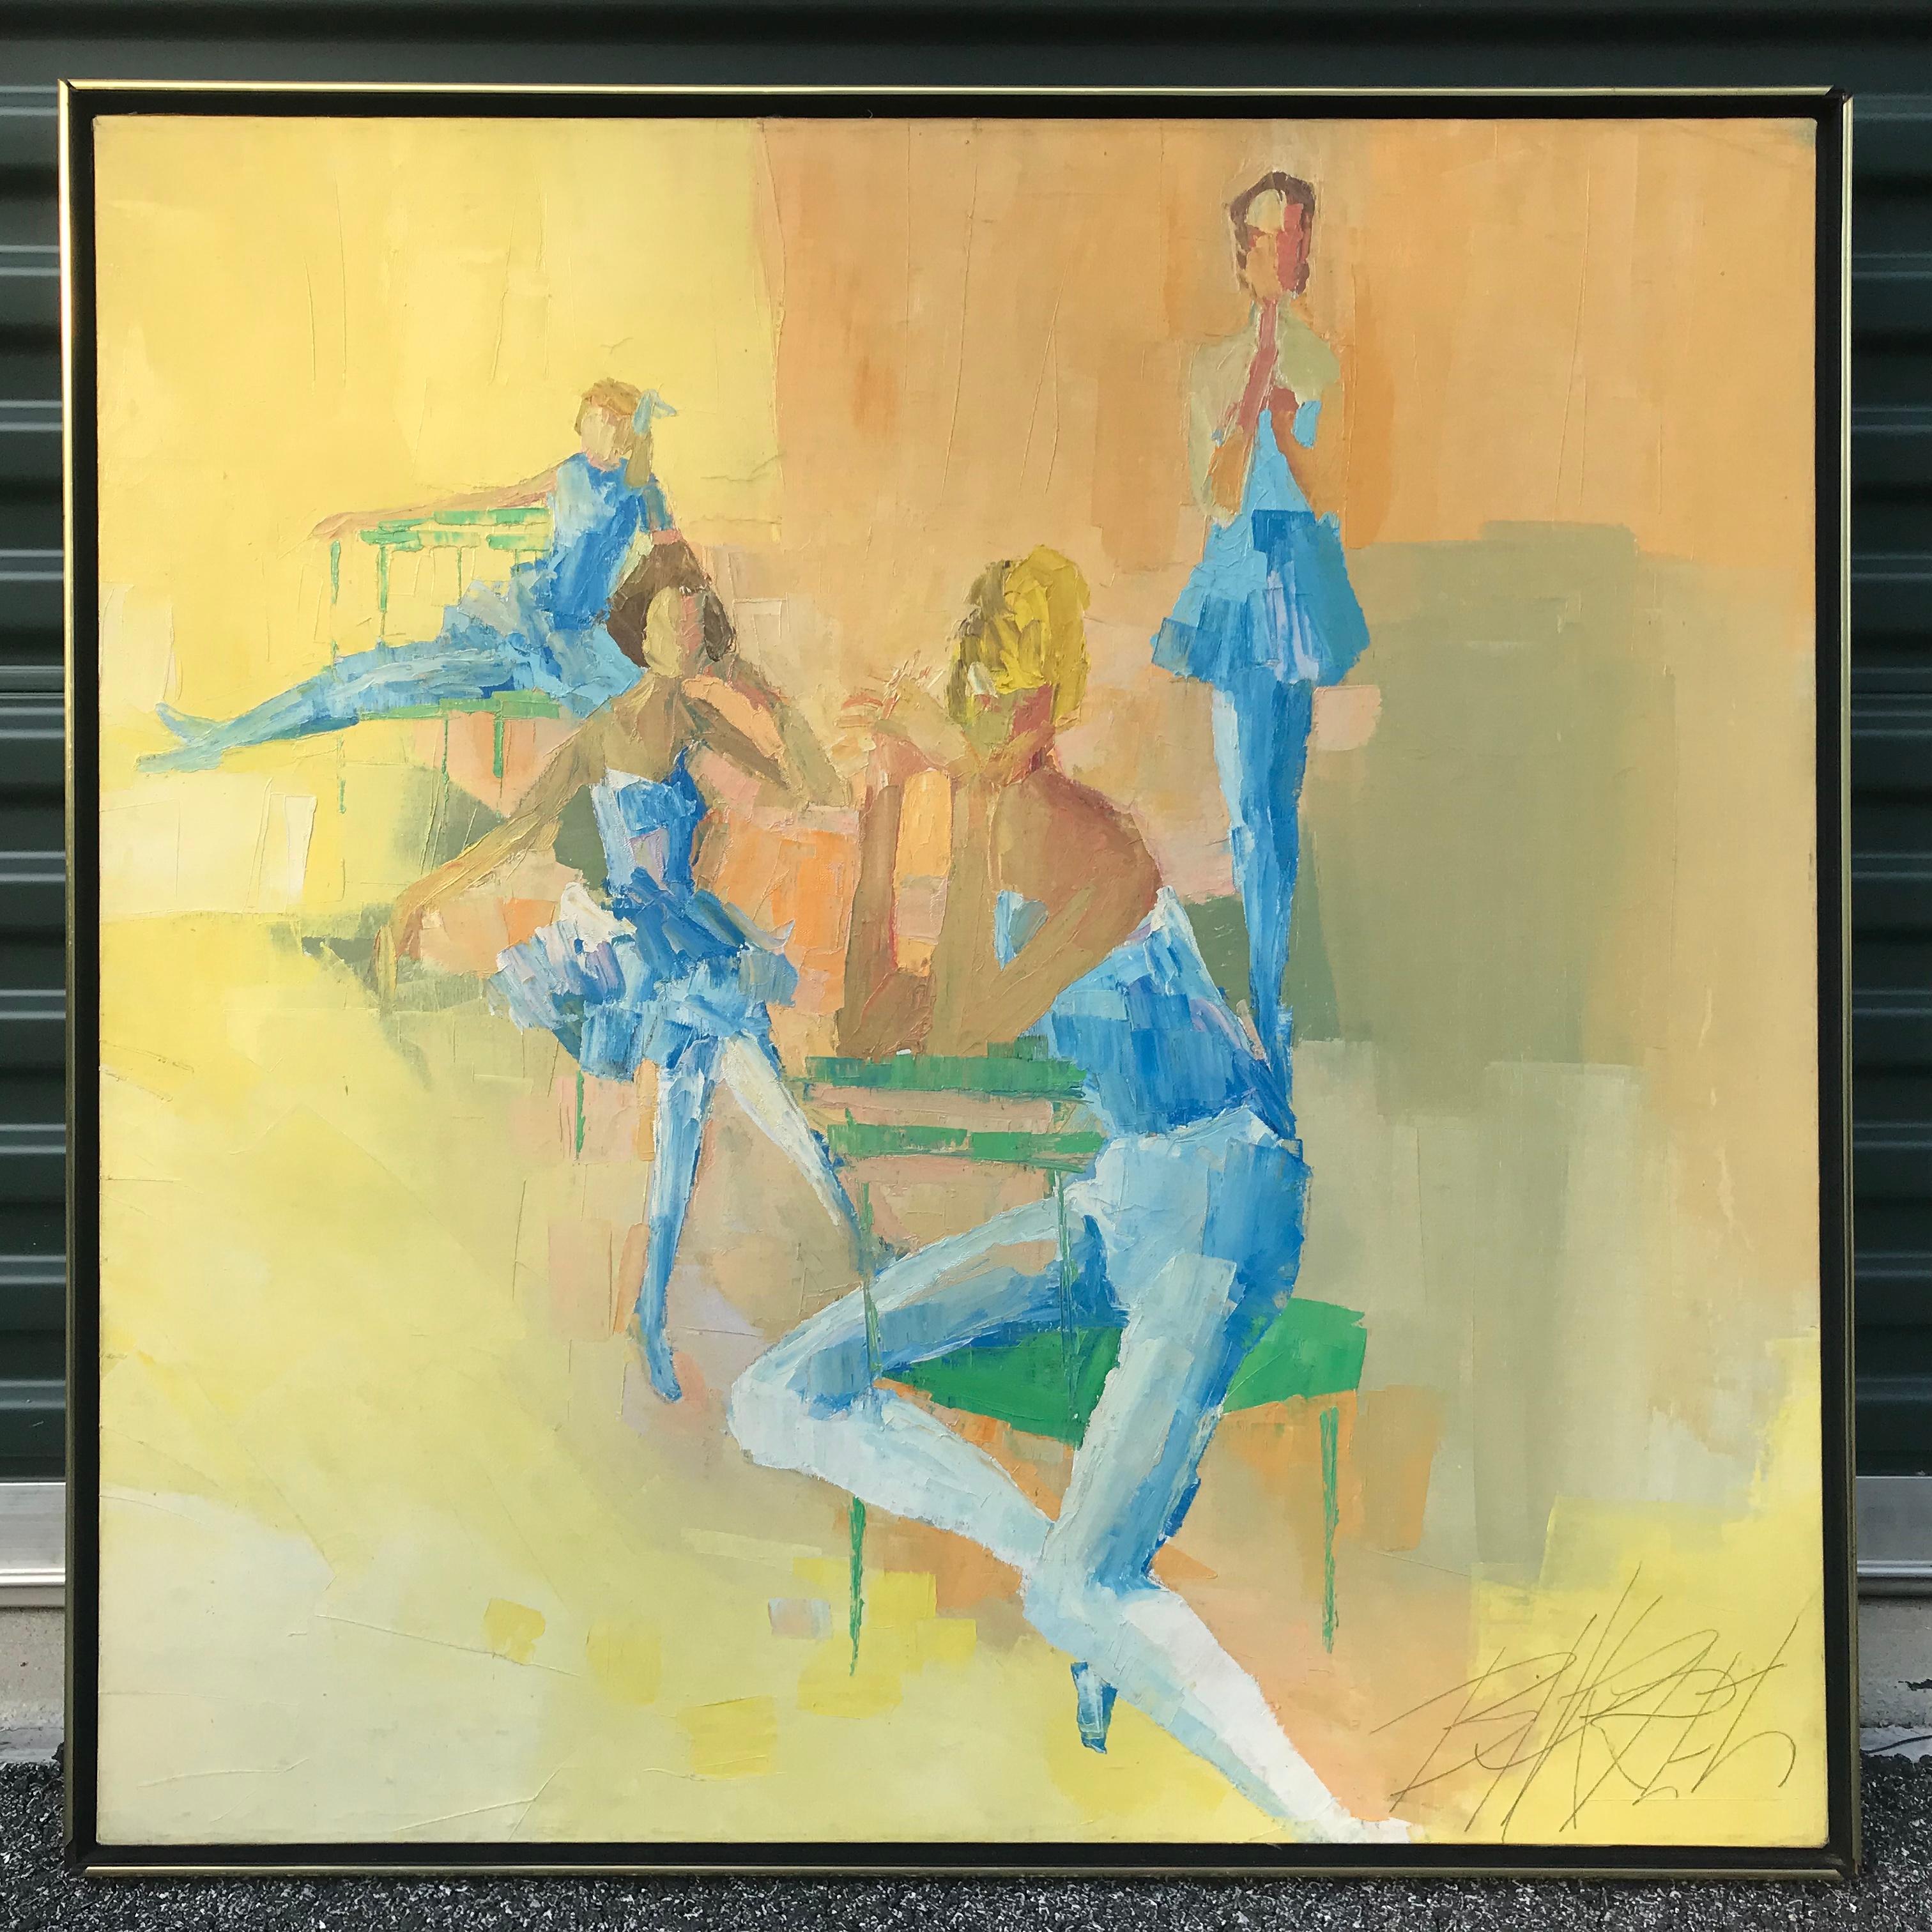 Mid-Century Modern oil on canvas by listed artist George Barrel depicting a ballerina in several overlayed poses. In original frame with paperwork still taped to back. Measures 37.25